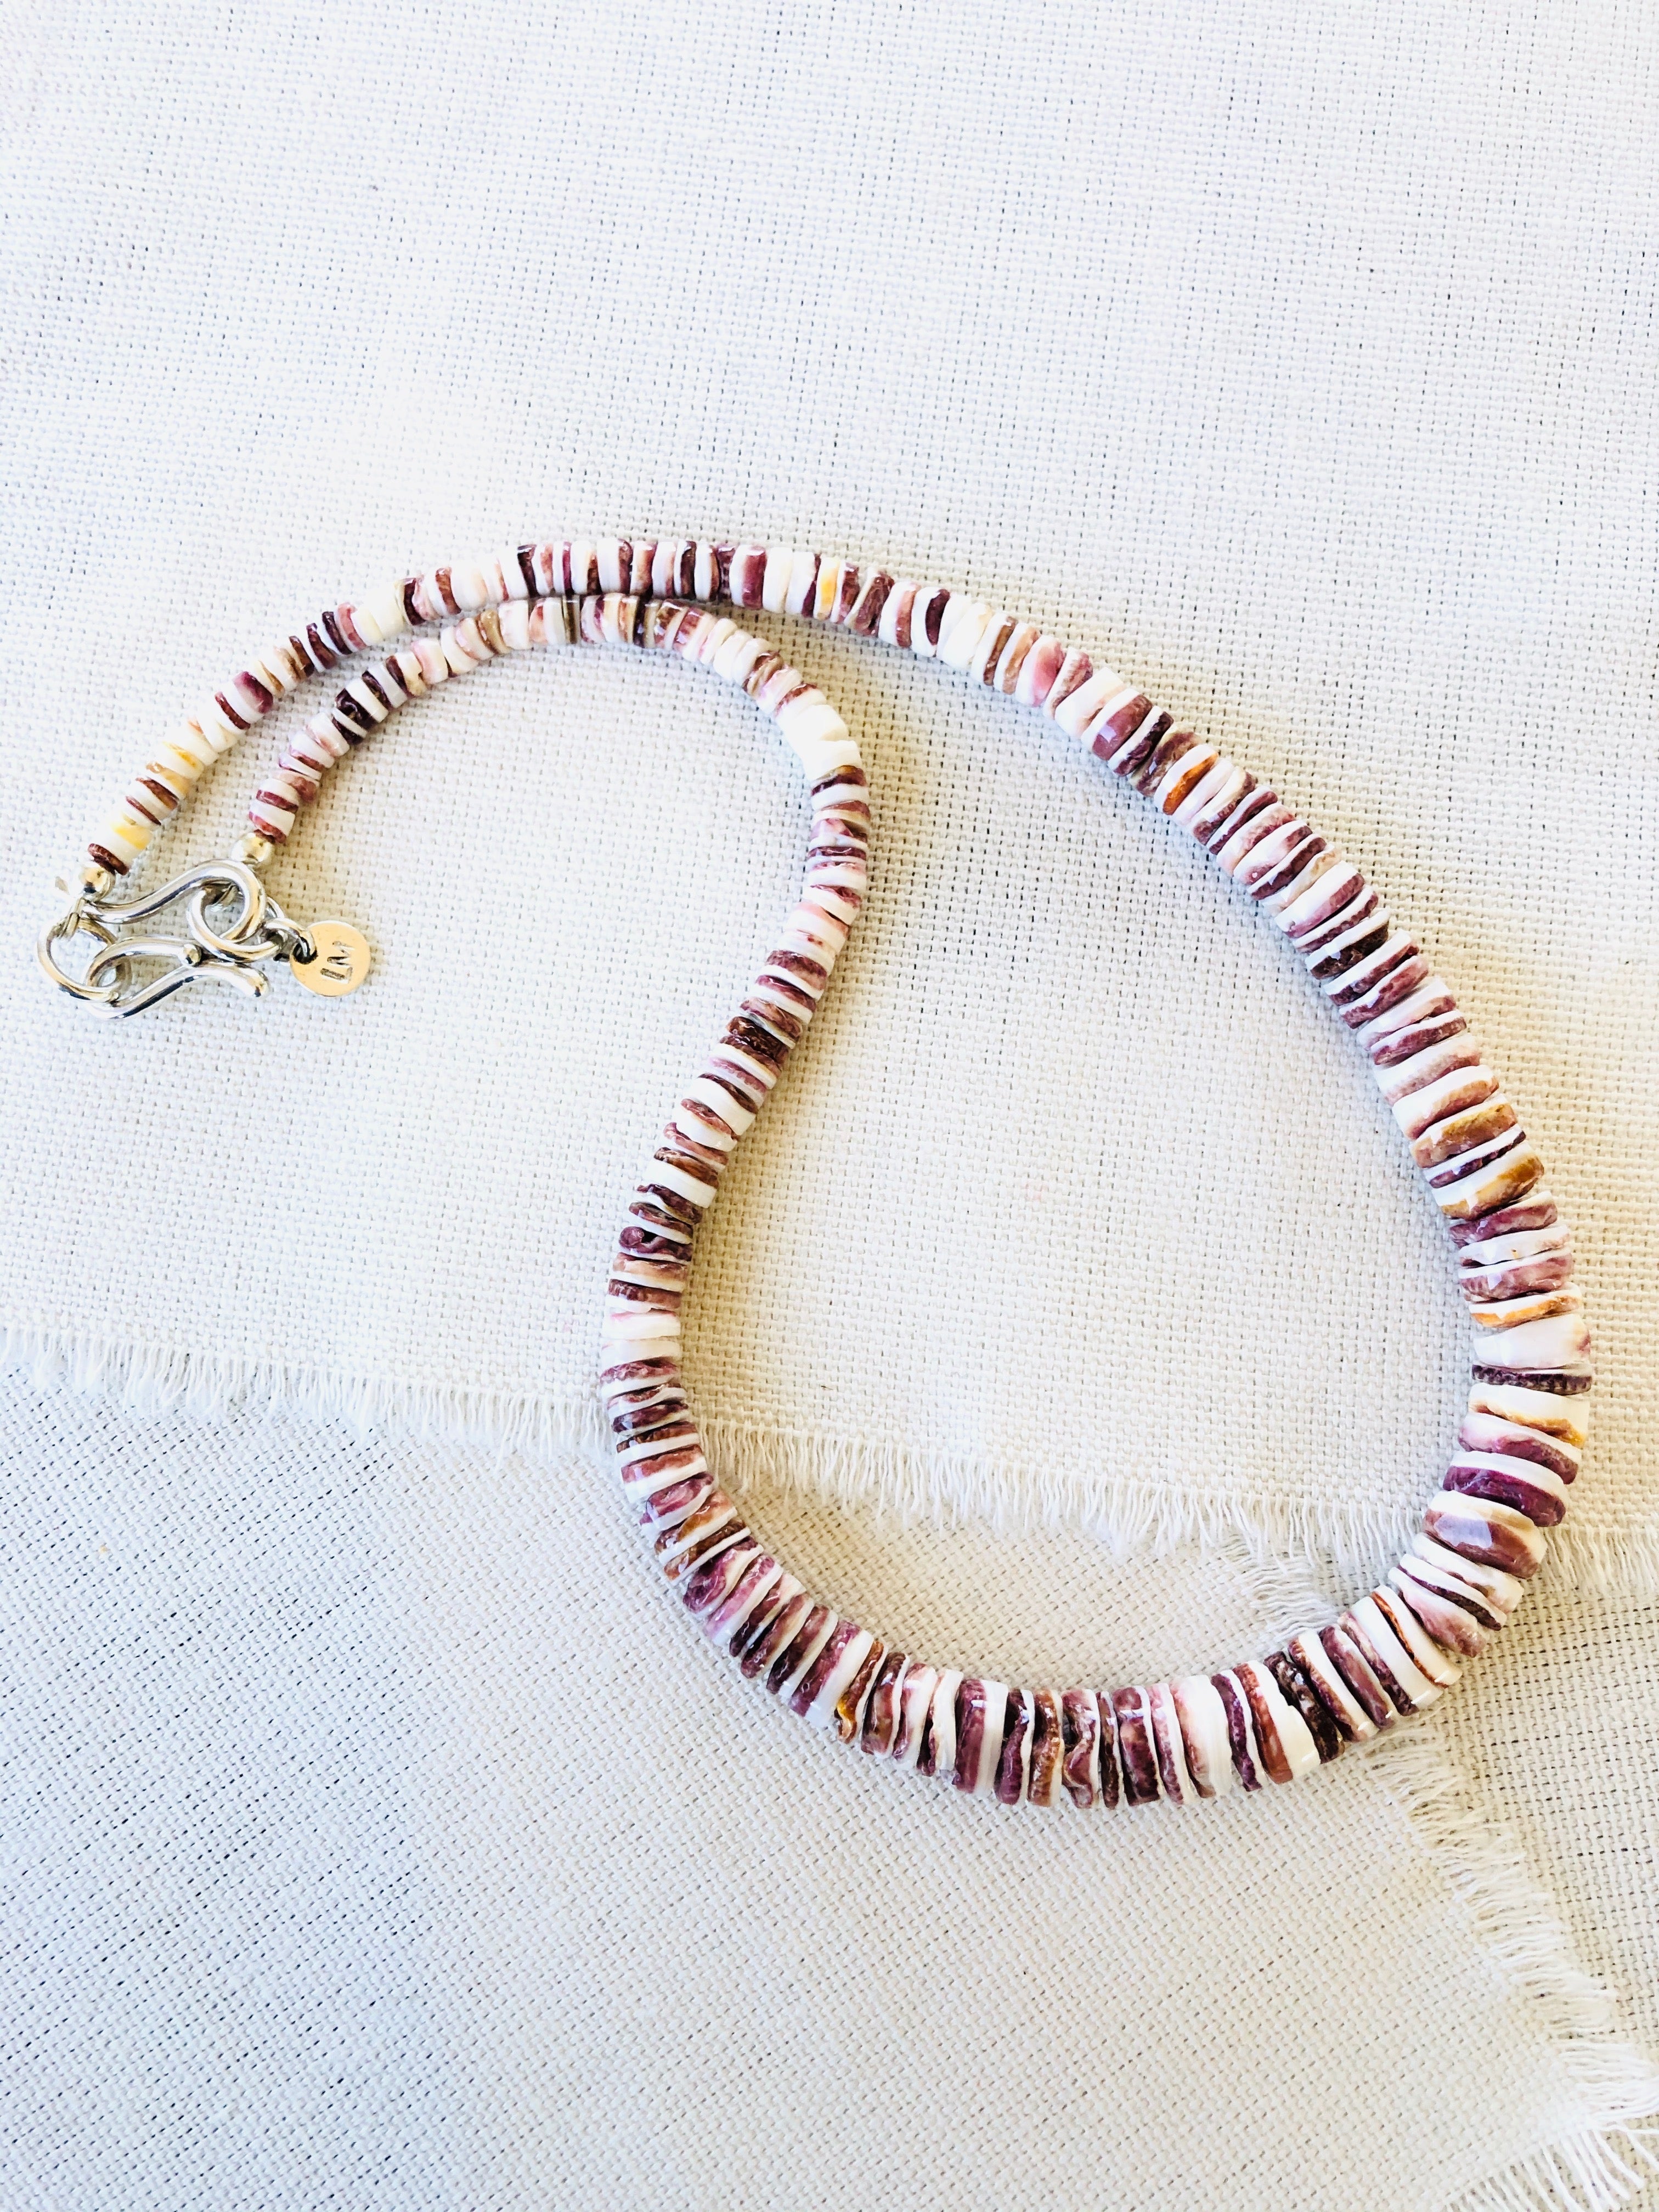 Unisex Purple Spiny Oyster Shell Beaded Necklace